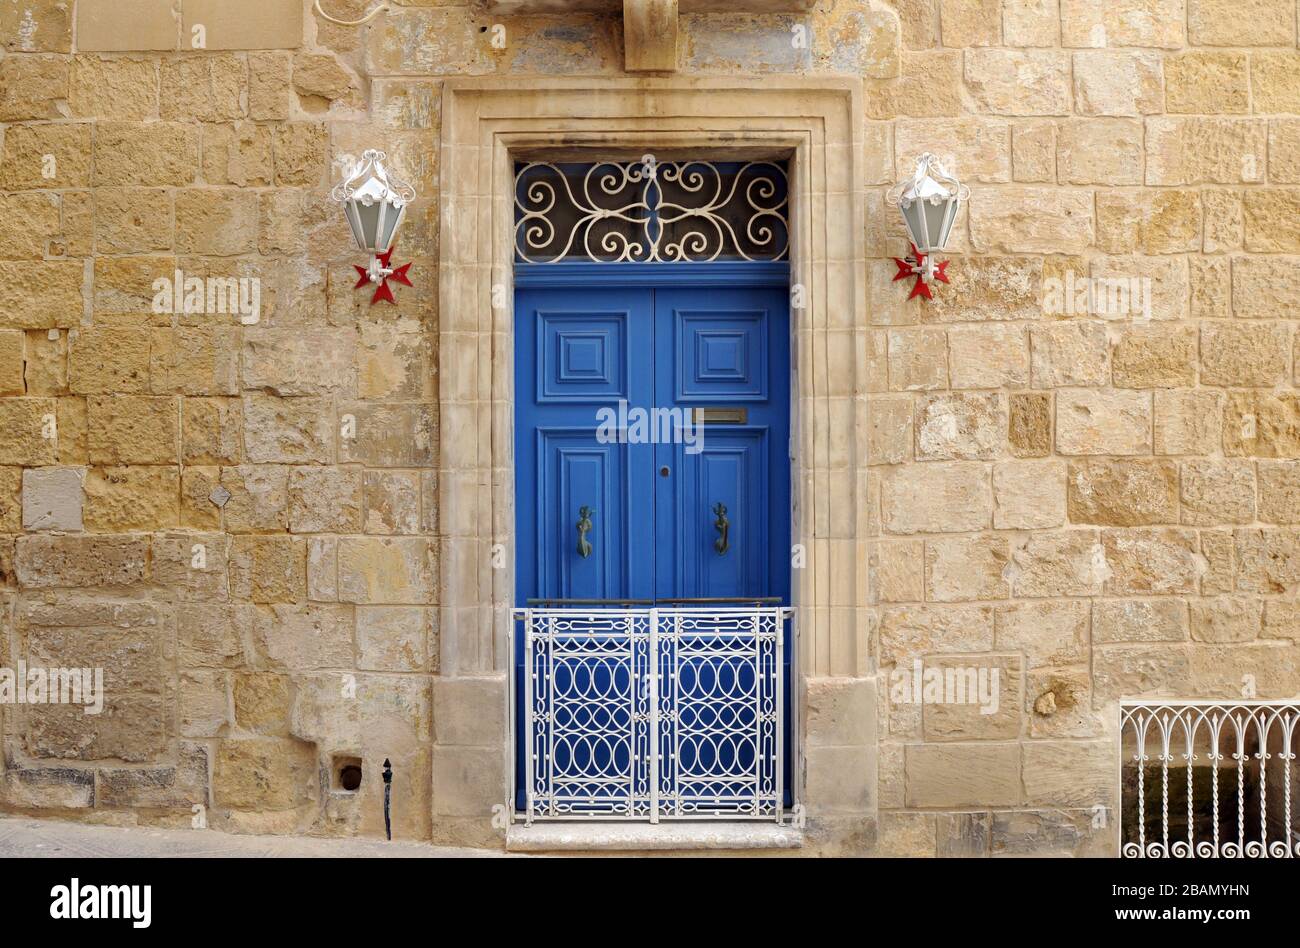 Detail of a doorway in the historic city of Senglea, one of the Three Cities across the Grand Harbour from the capital of Malta, Valletta. Stock Photo